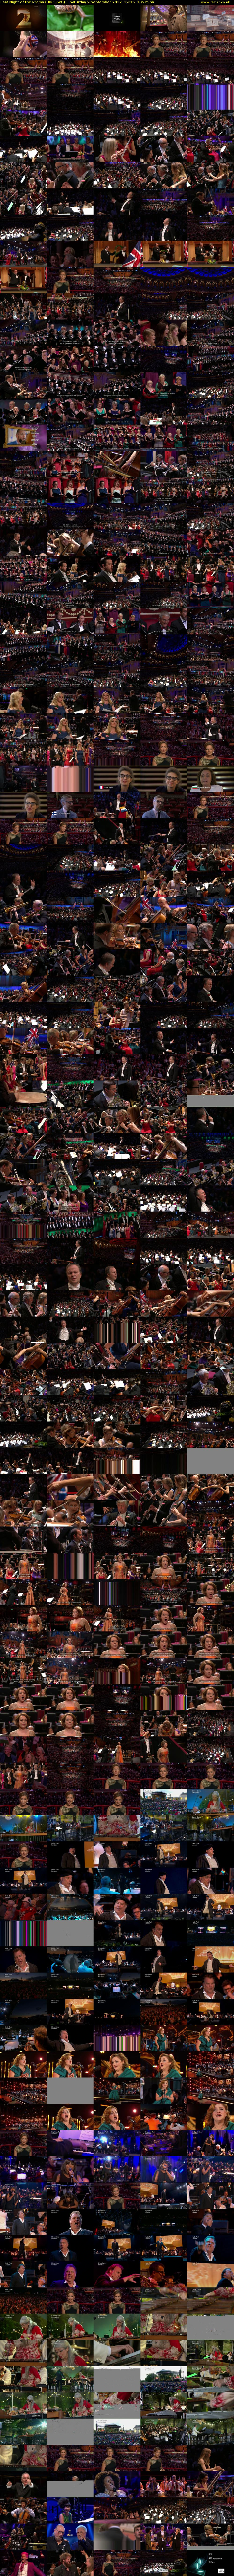 Last Night of the Proms (BBC TWO) Saturday 9 September 2017 19:15 - 21:00